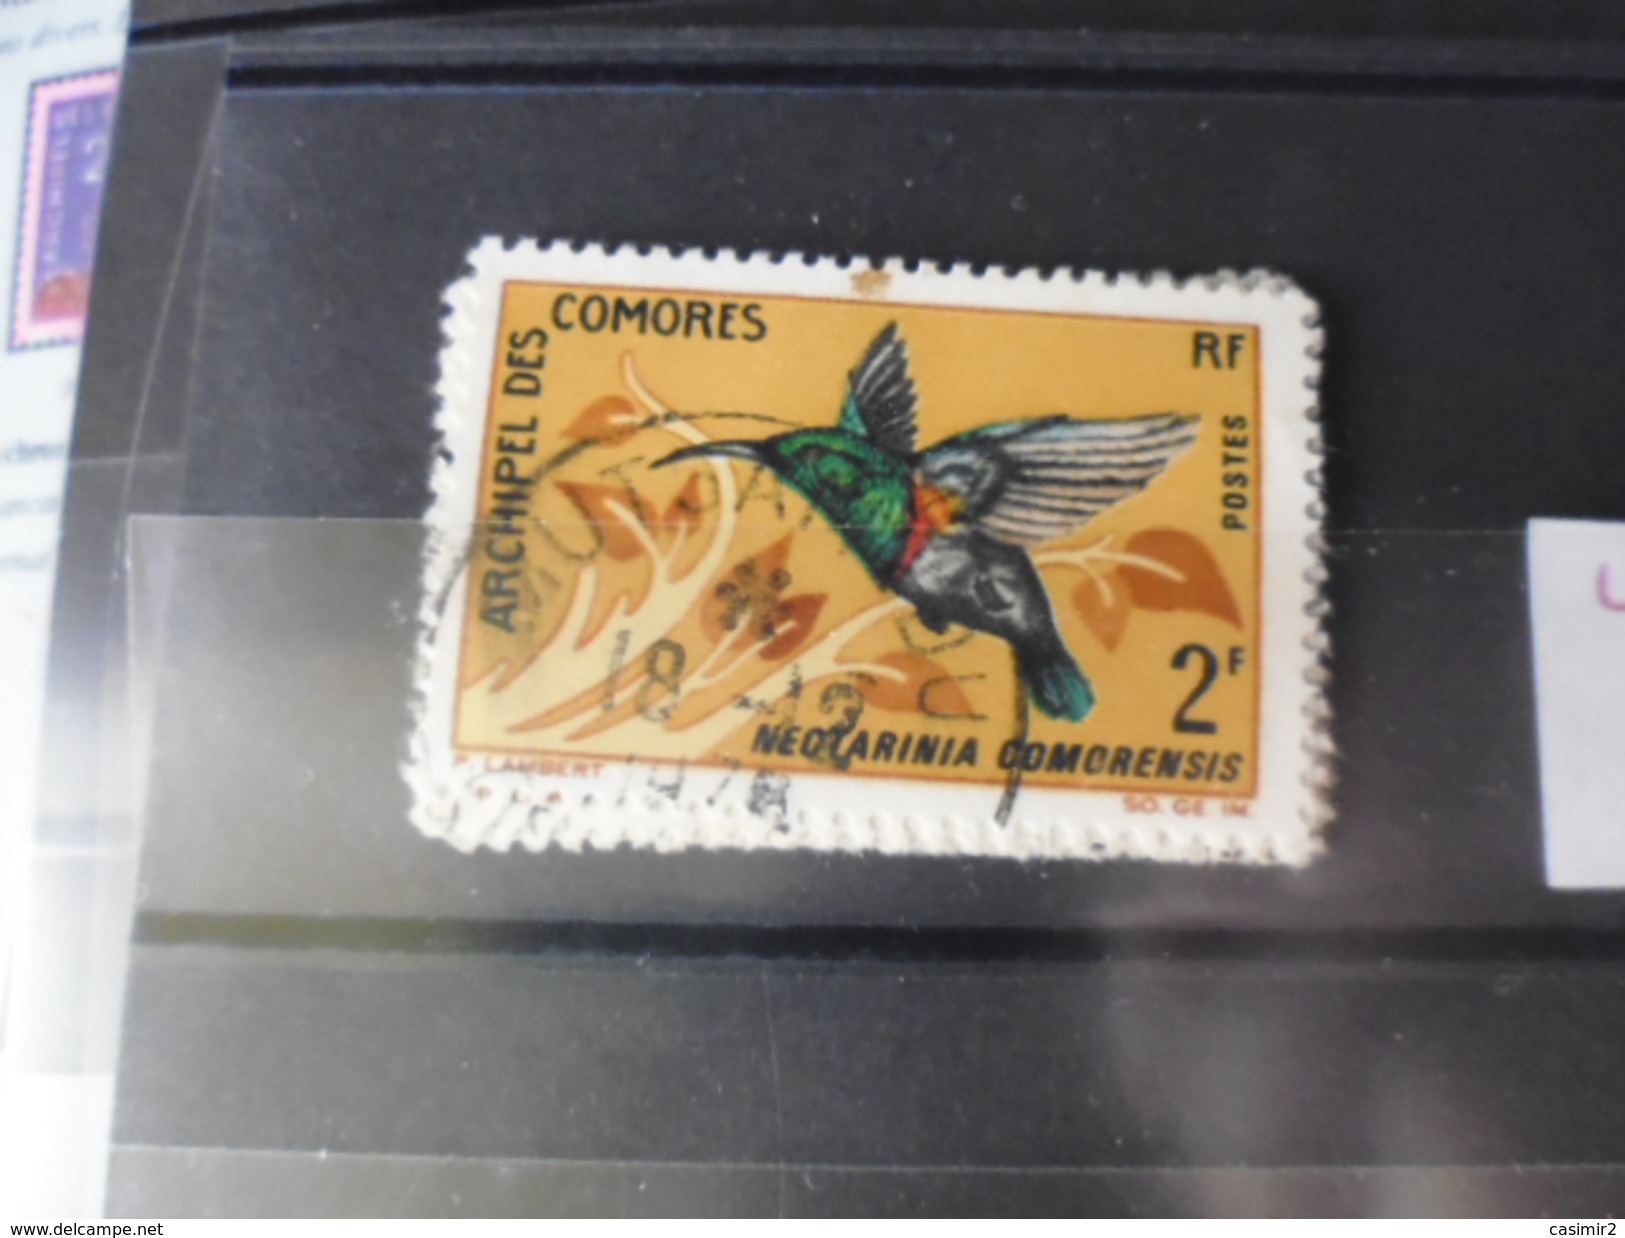 COMORES TIMBRE OU SERIE YVERT N° 41 - Used Stamps